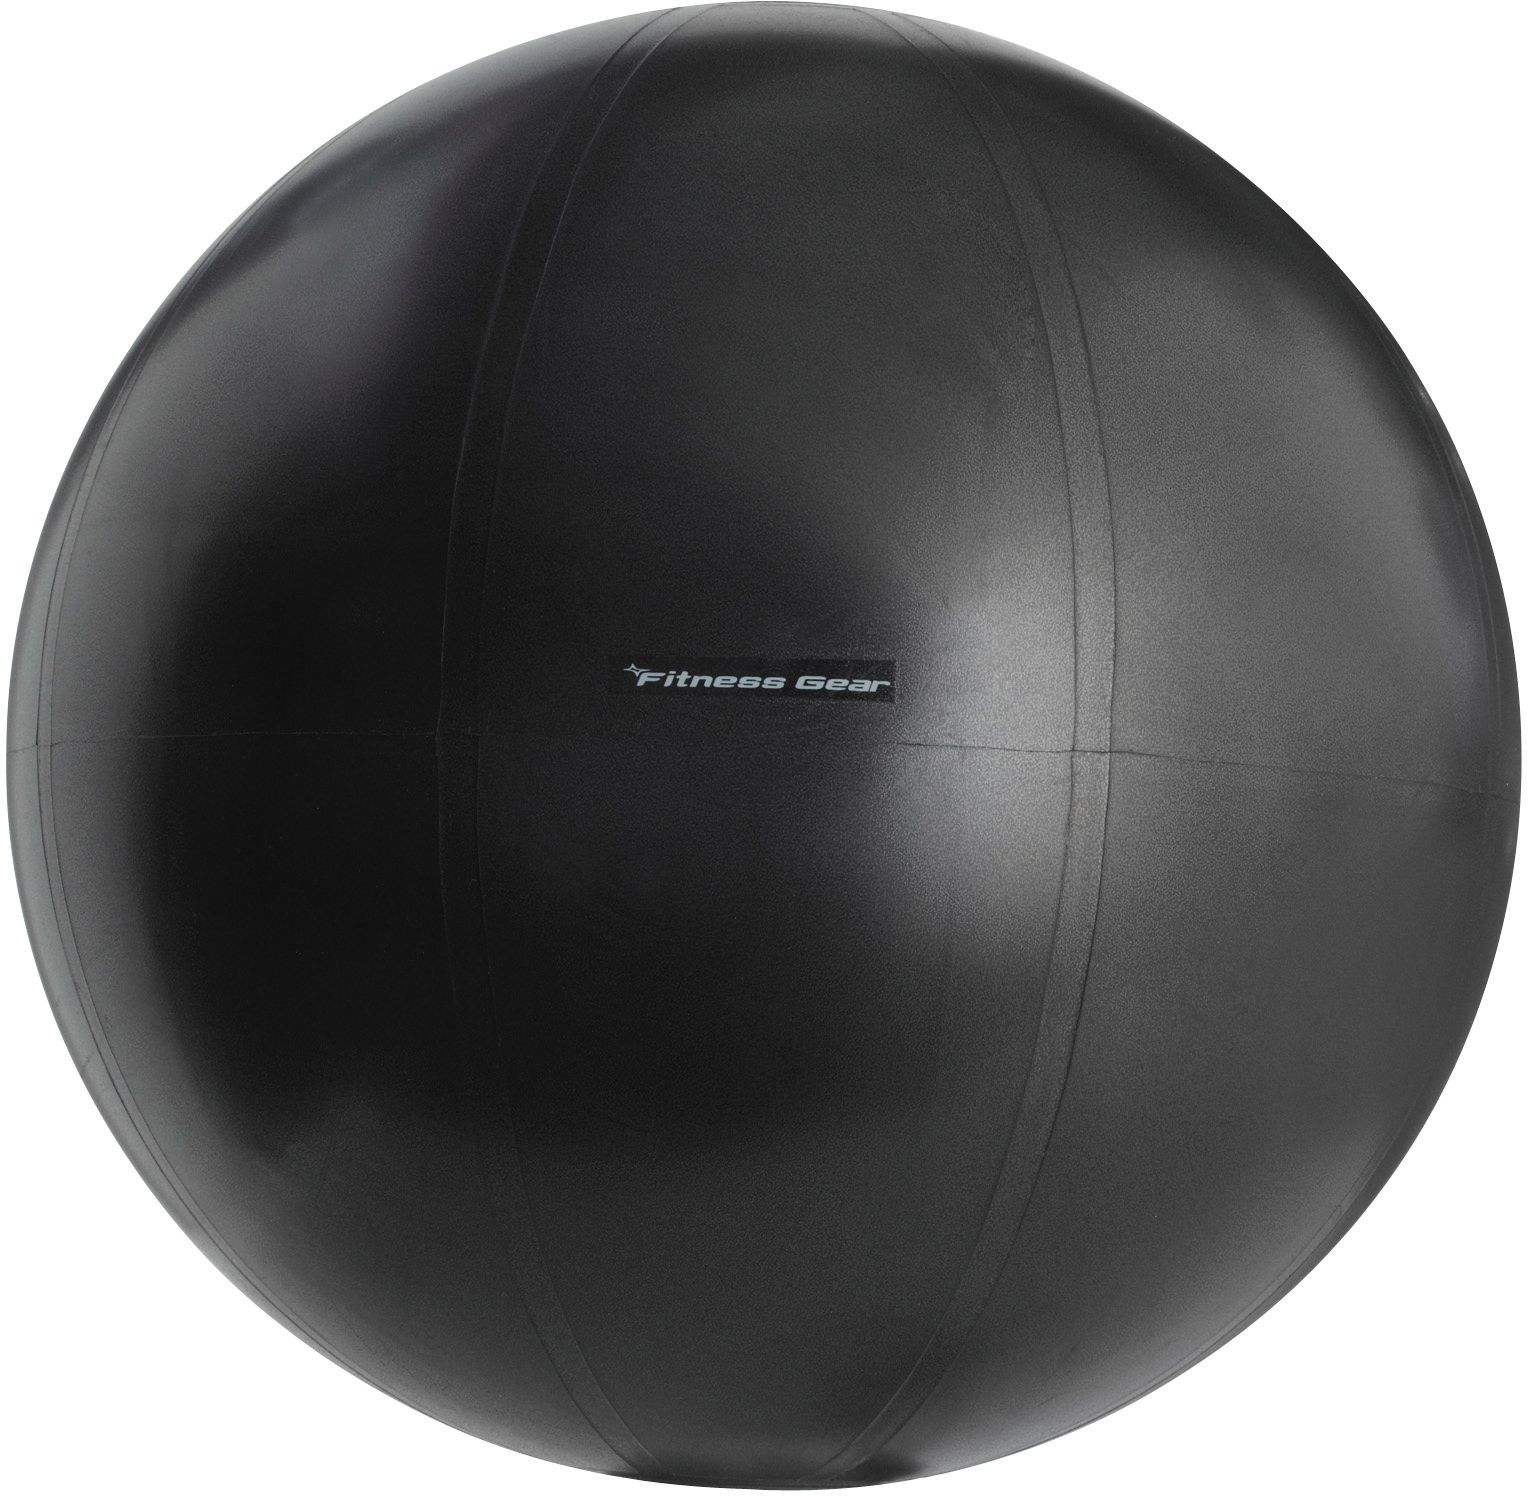 Fitness Gear 75 cm Premium Stability Ball | DICK'S Sporting Goods